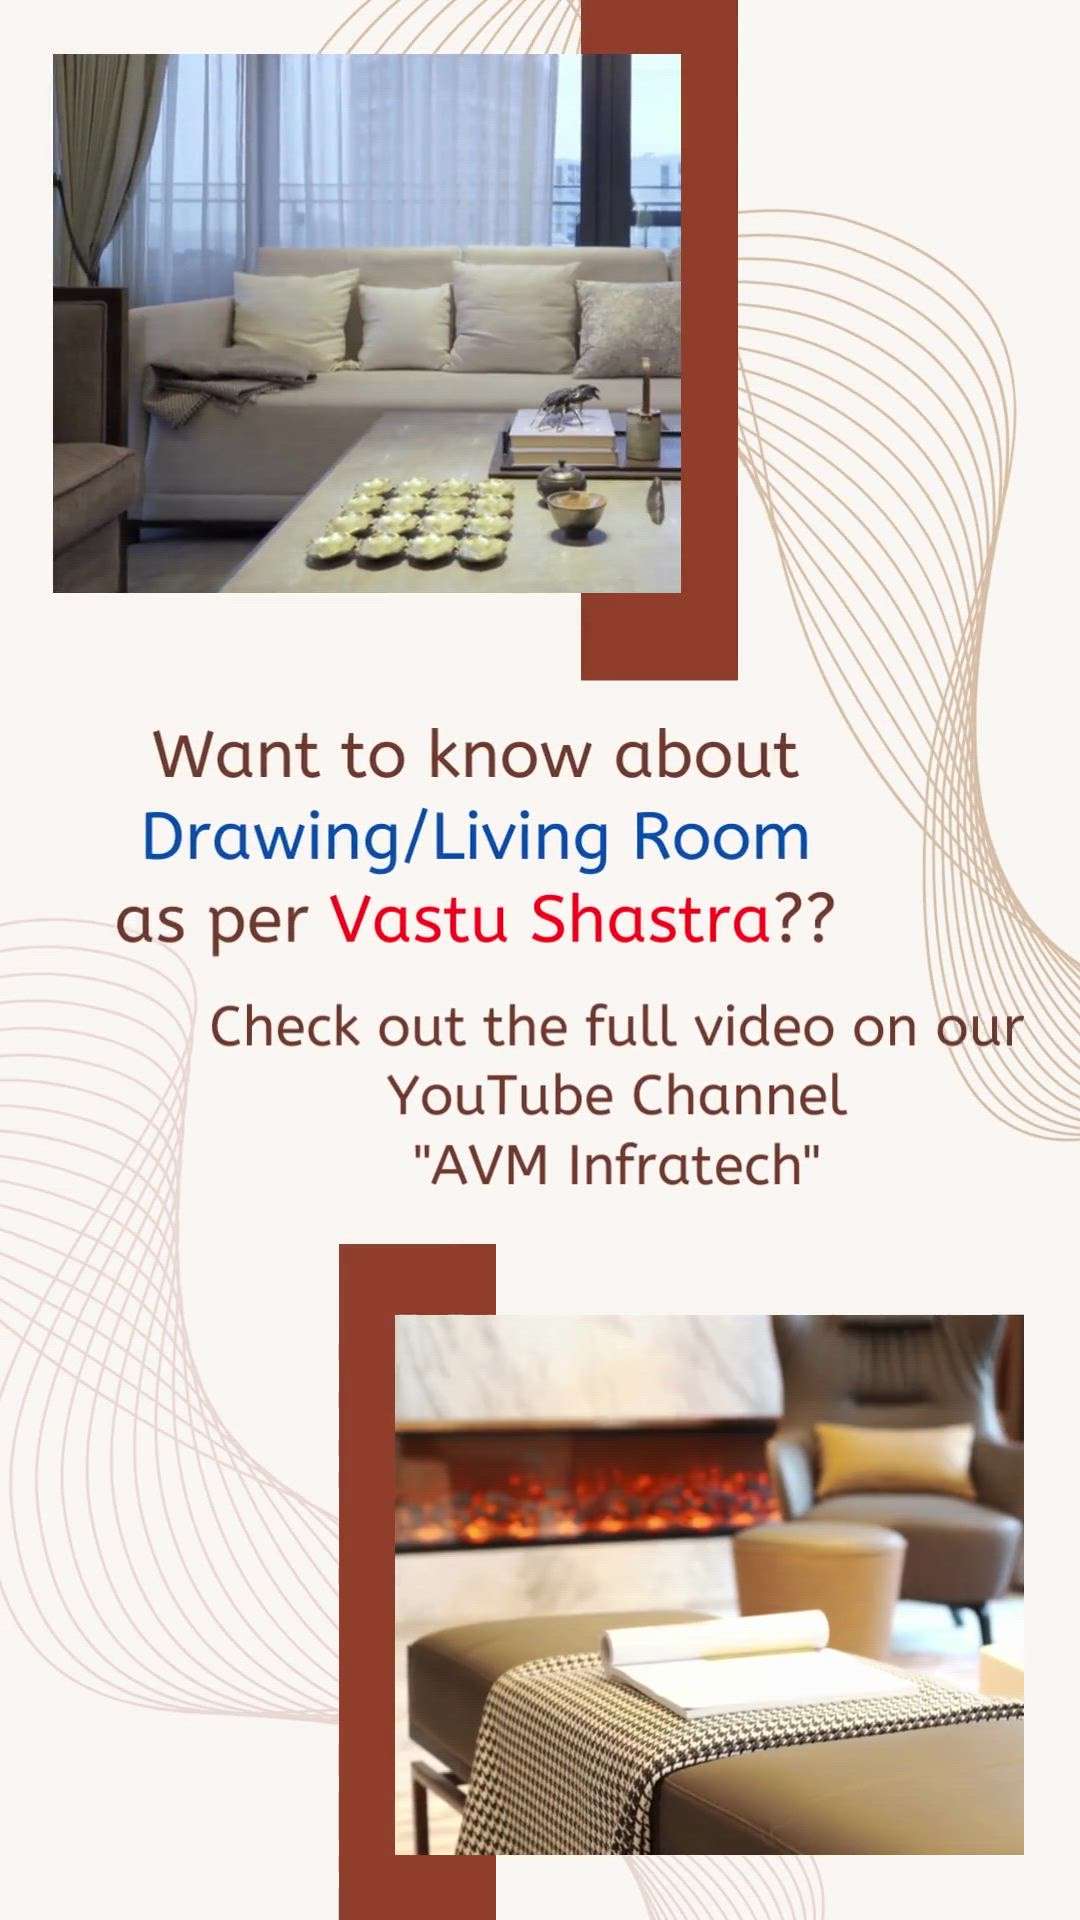 Want to know about Drawing/Living Room as per Vastu Shastra? Check out the full video uploaded on our YouTube channel. 


Follow us for more such amazing updates.
.
.
#vastudesign #vastulogy #vastutips #vastutipsforhome #vastu #vastutip #vastushashtra #vastuexpert #vastuhome #vastuconsultant #vasturemedies #vastushanti #vastuvidya #vastuforhome #vastu_home #vastulogic #drawing #drawingroom #drawingroomdecor #livingroomdesign #livingroom #living #livingroomdecoration #livingrooms #avminfratech